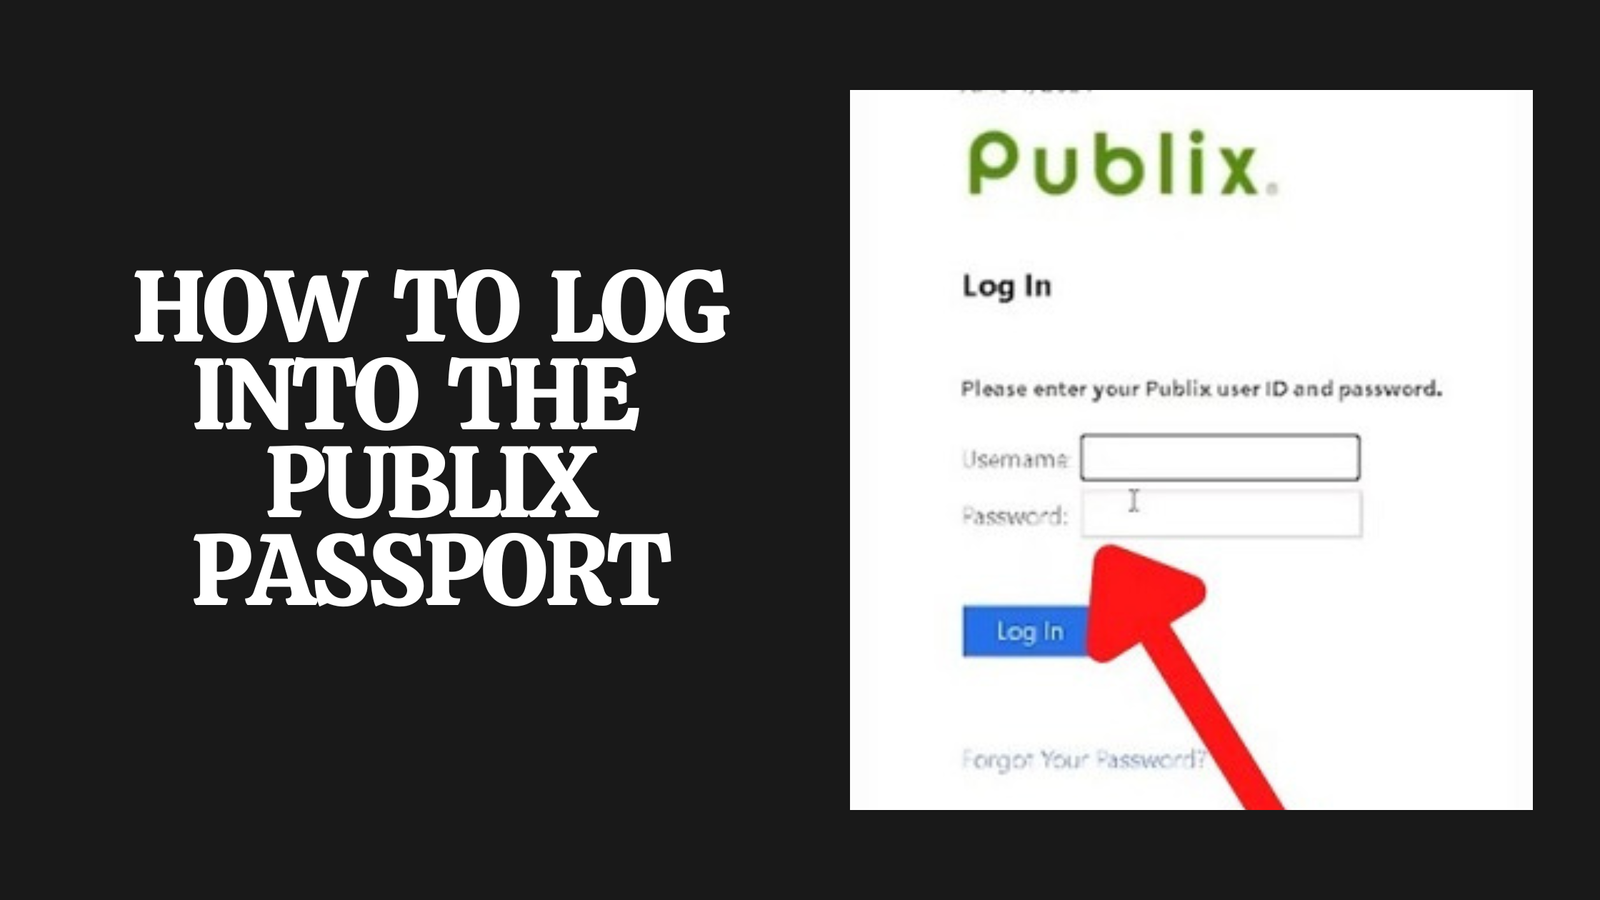 How to Log into the Publix Passport?